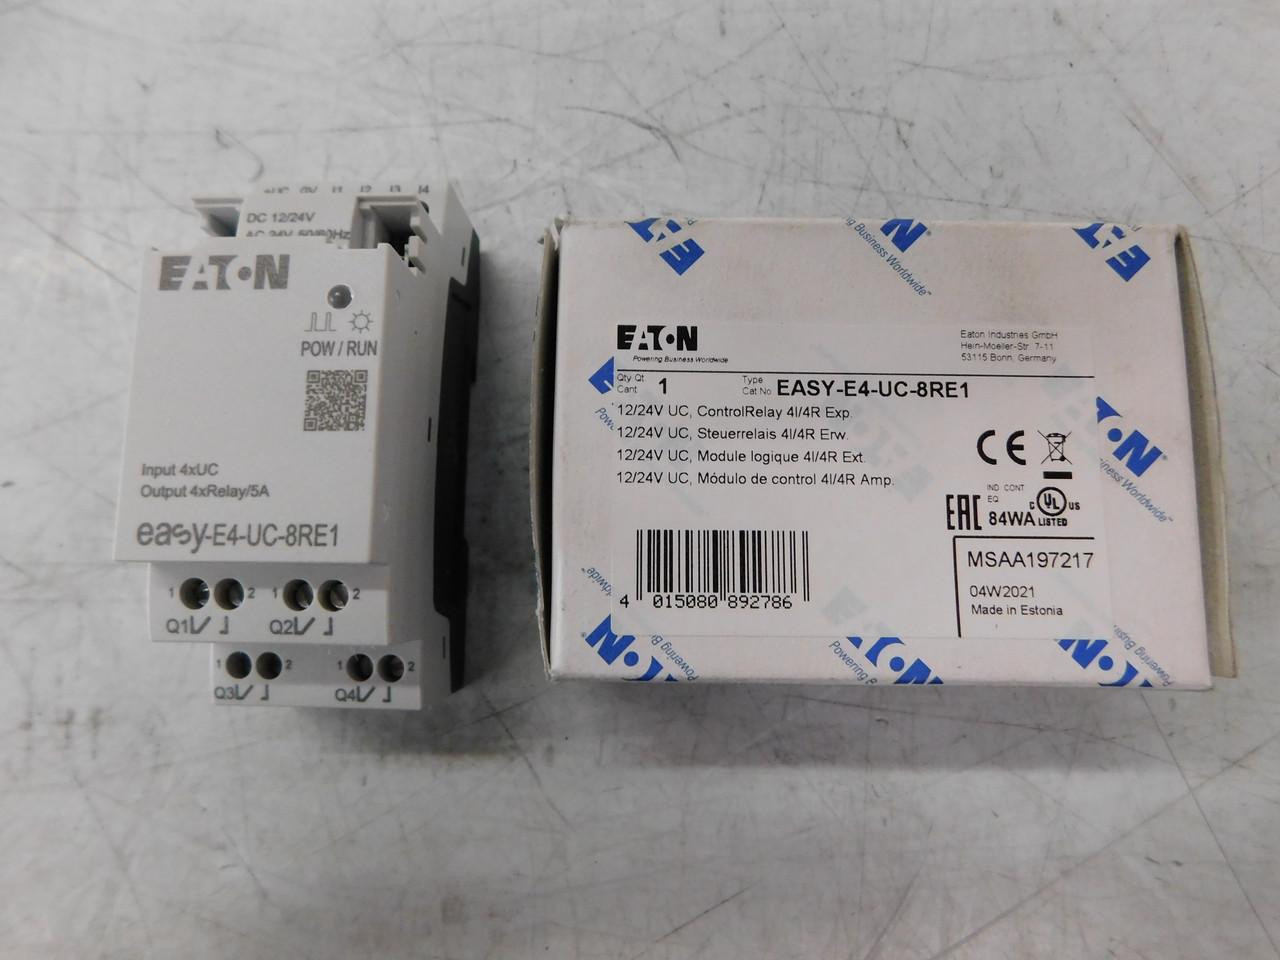 Eaton EASY-E4-UC-8RE1  The easyE4 is the world’s premier nano PLC. Containing 12 I/O with the capability to be expanded to a network of up to 188 I/O points, the easyE4 provides the ideal solution for lighting, energy management, industrial control, irrigation, pump control, H